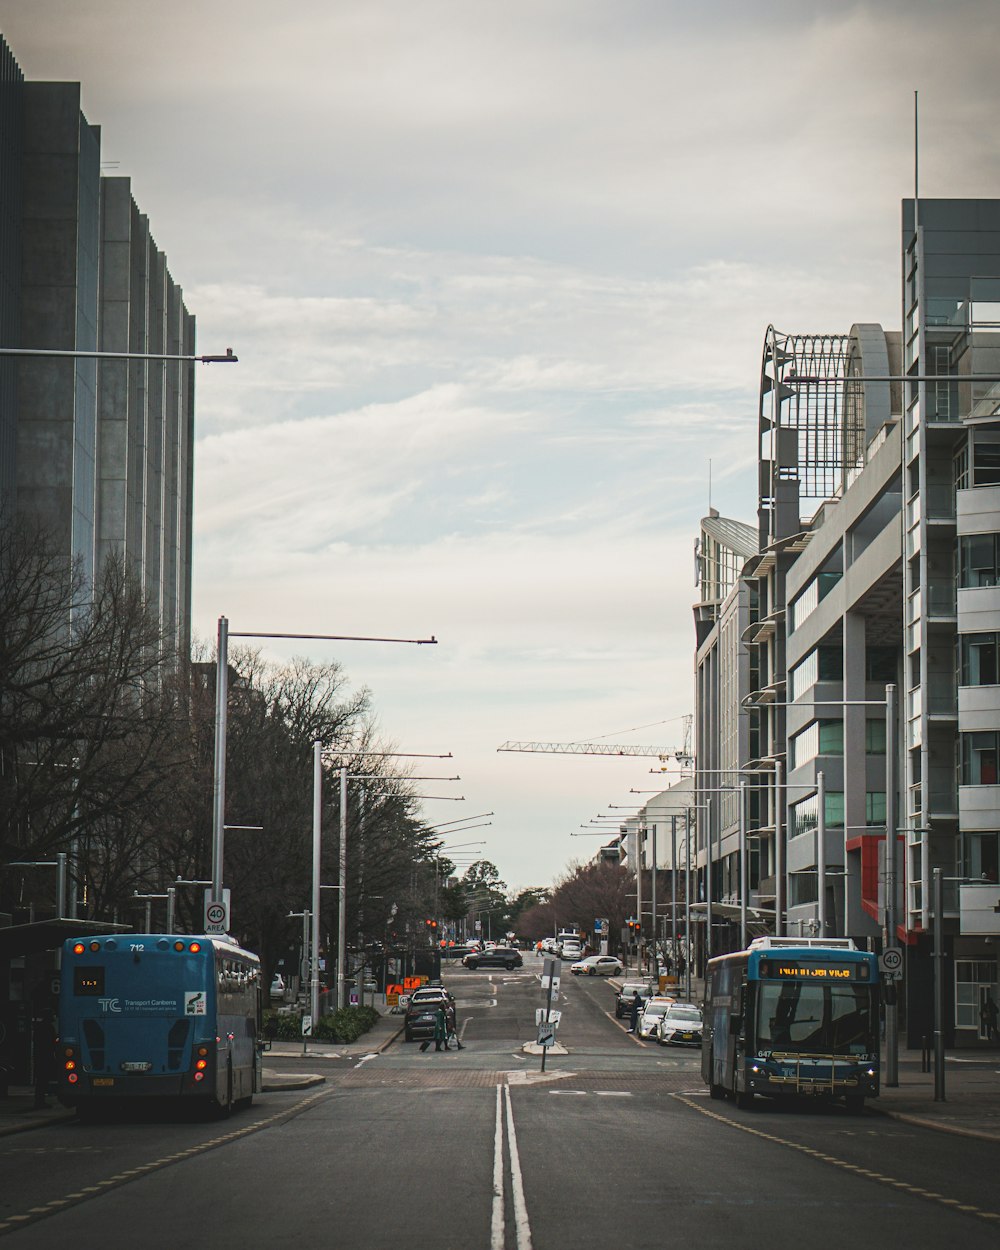 a city street with buses and cars